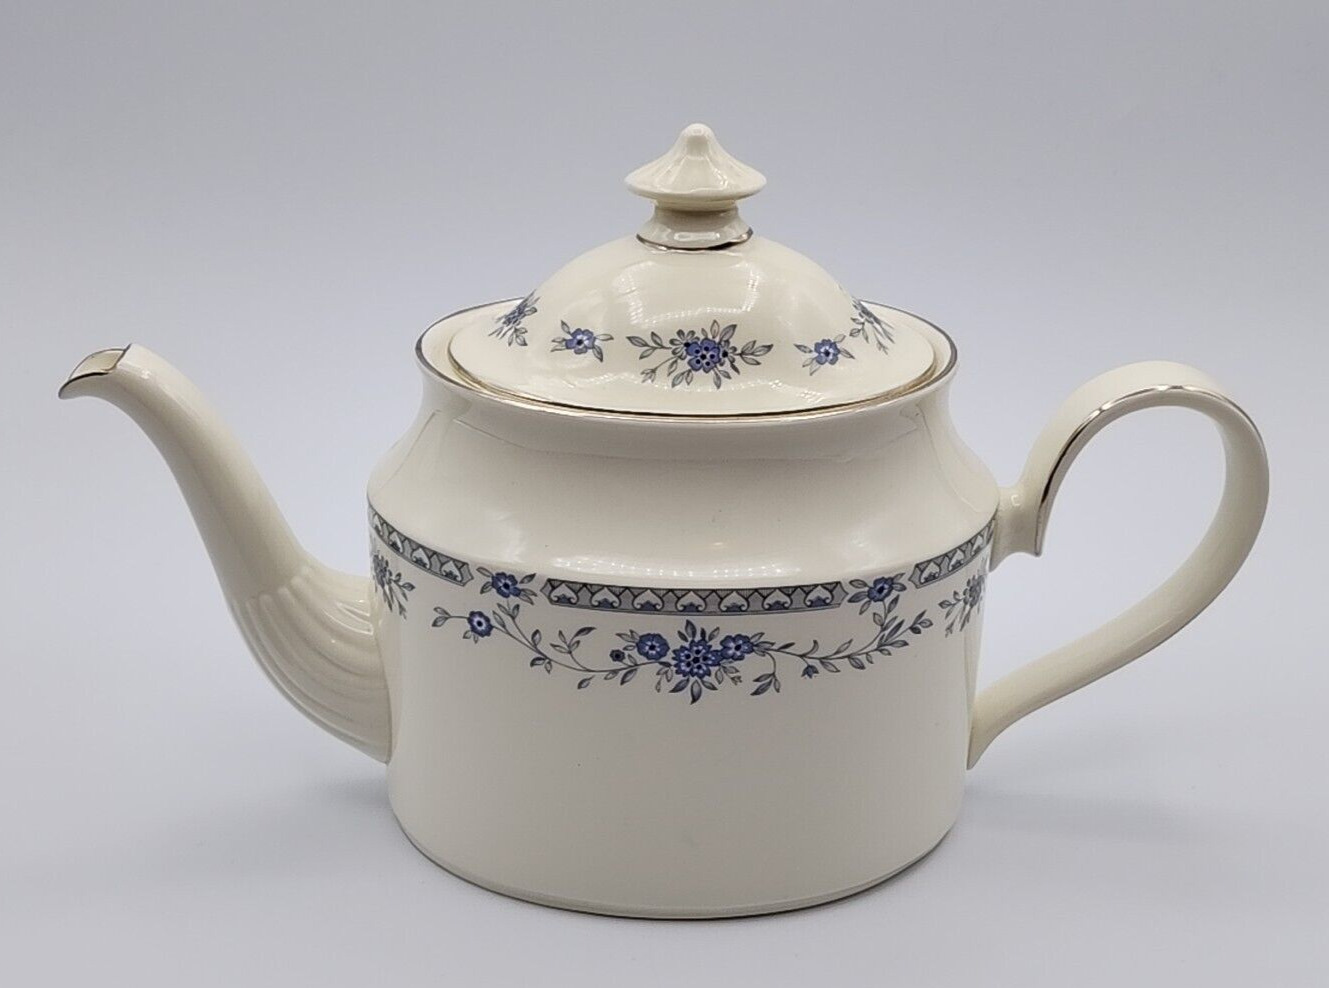 Minton Bellemeade Bone China Teapot Made in England Roughly 7 1/4